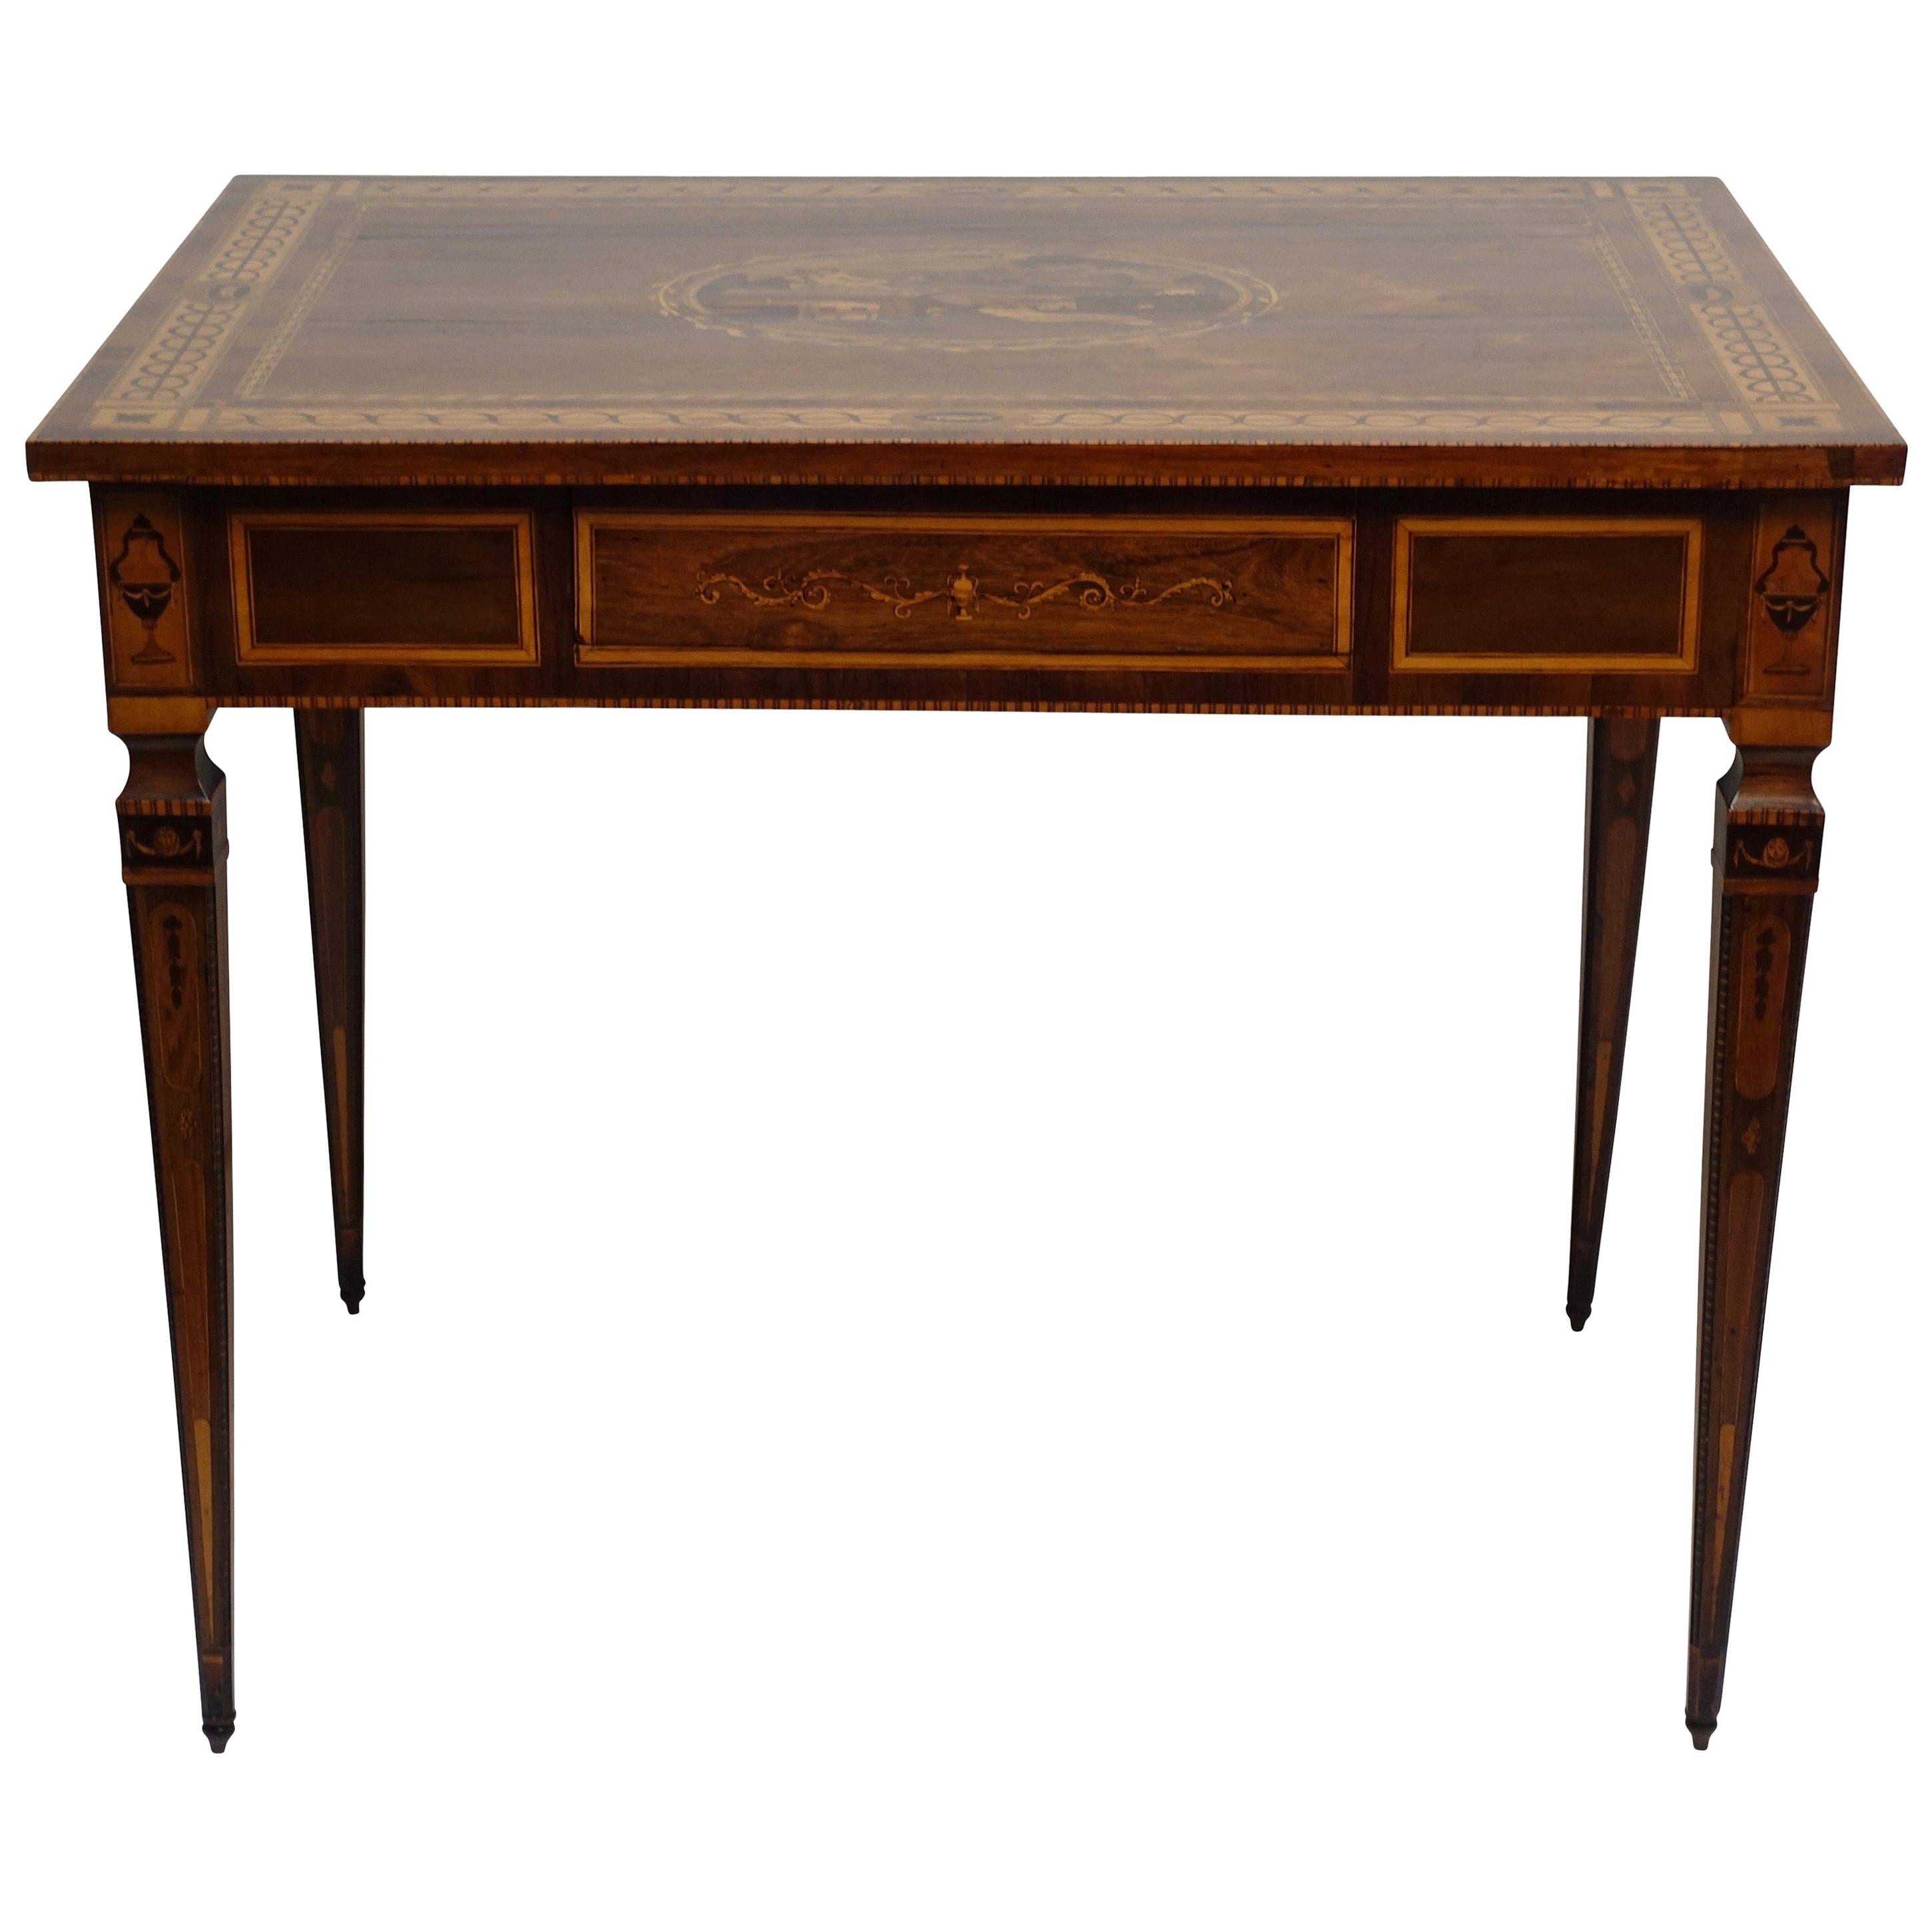 Mixed Woods Marquetry Inlaid Writing Table, Northern Italian, Late 18th Century For Sale